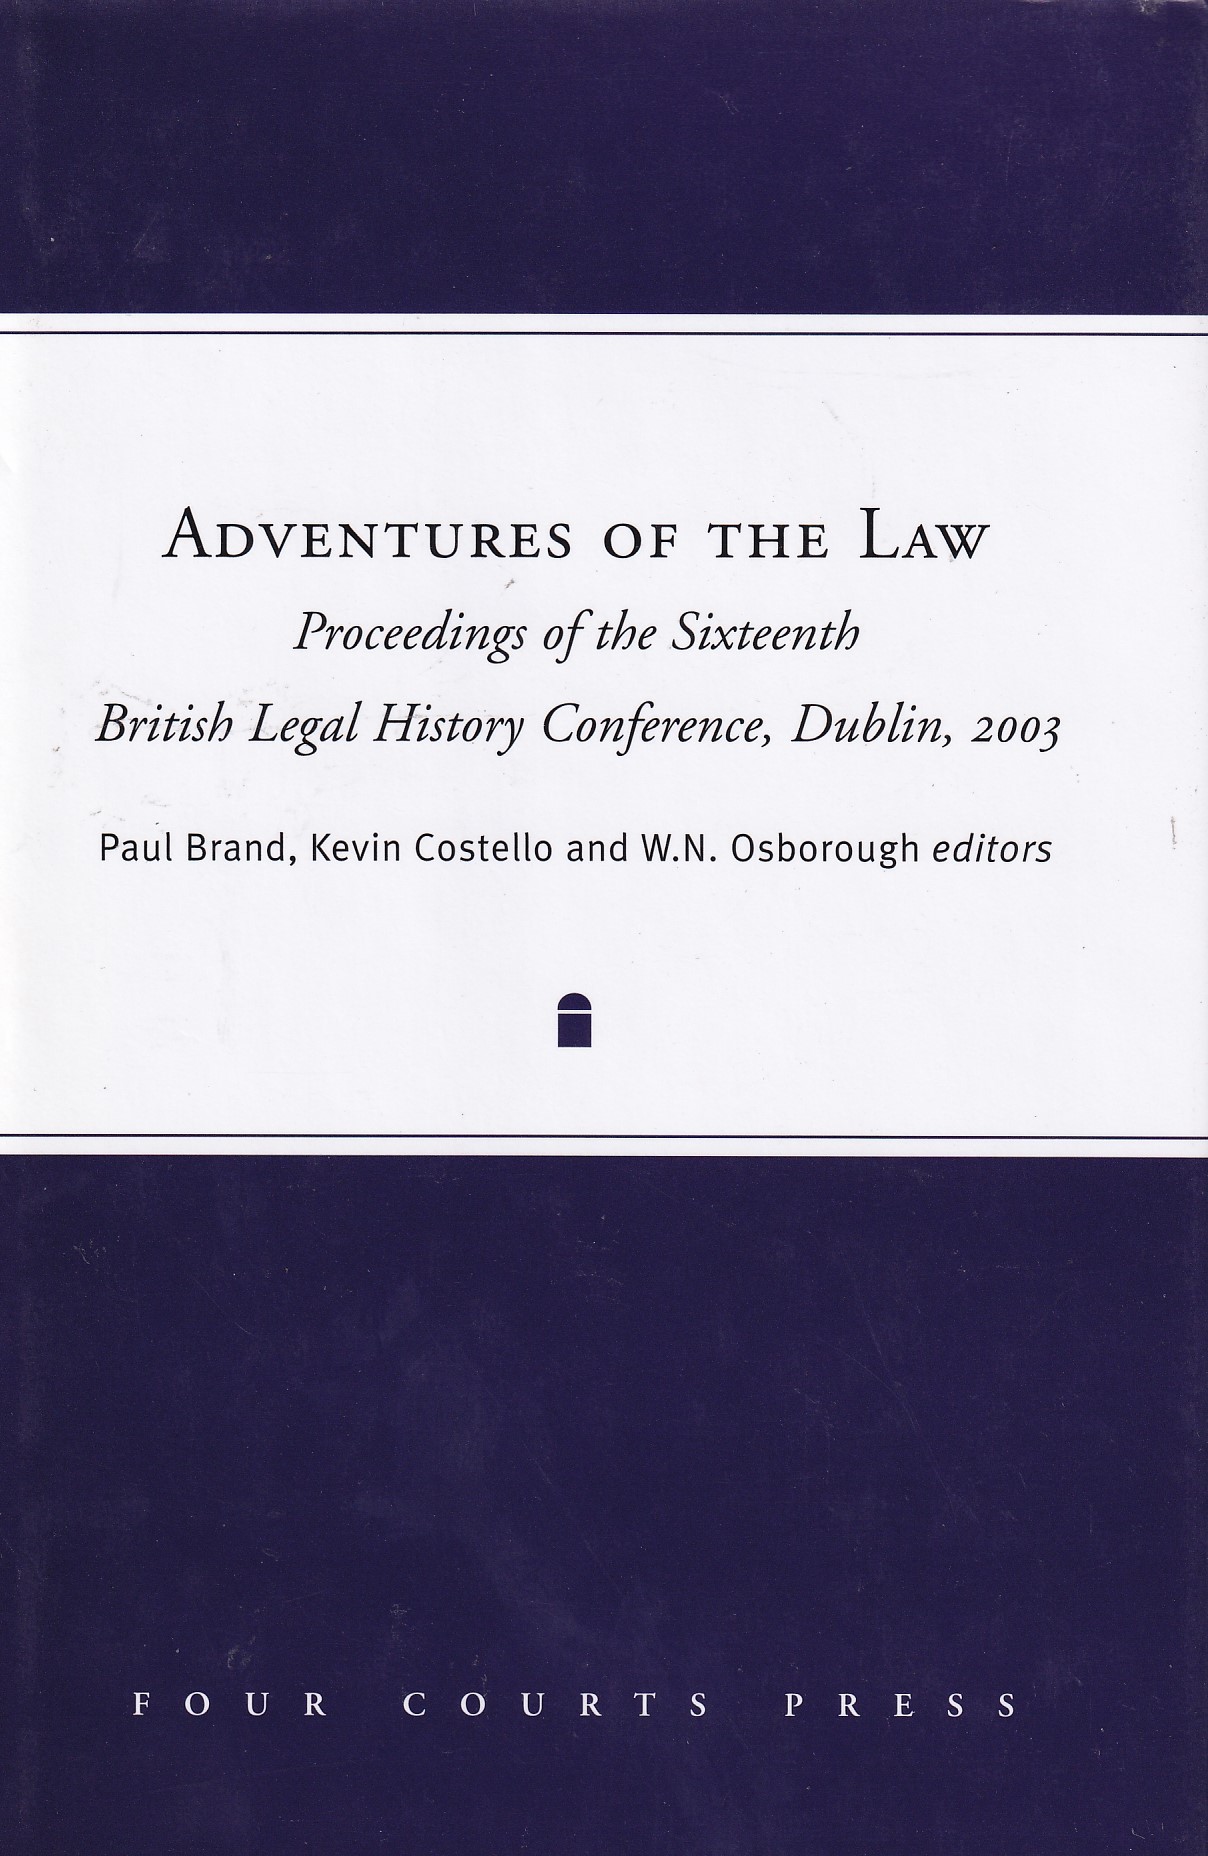 Adventures of the Law: Proceedings of the Sixteenth British Legal History Conference, Dublin (Irish Legal History Society) by Brand, Paul; Costello, Kevin; Osborough, W. N.